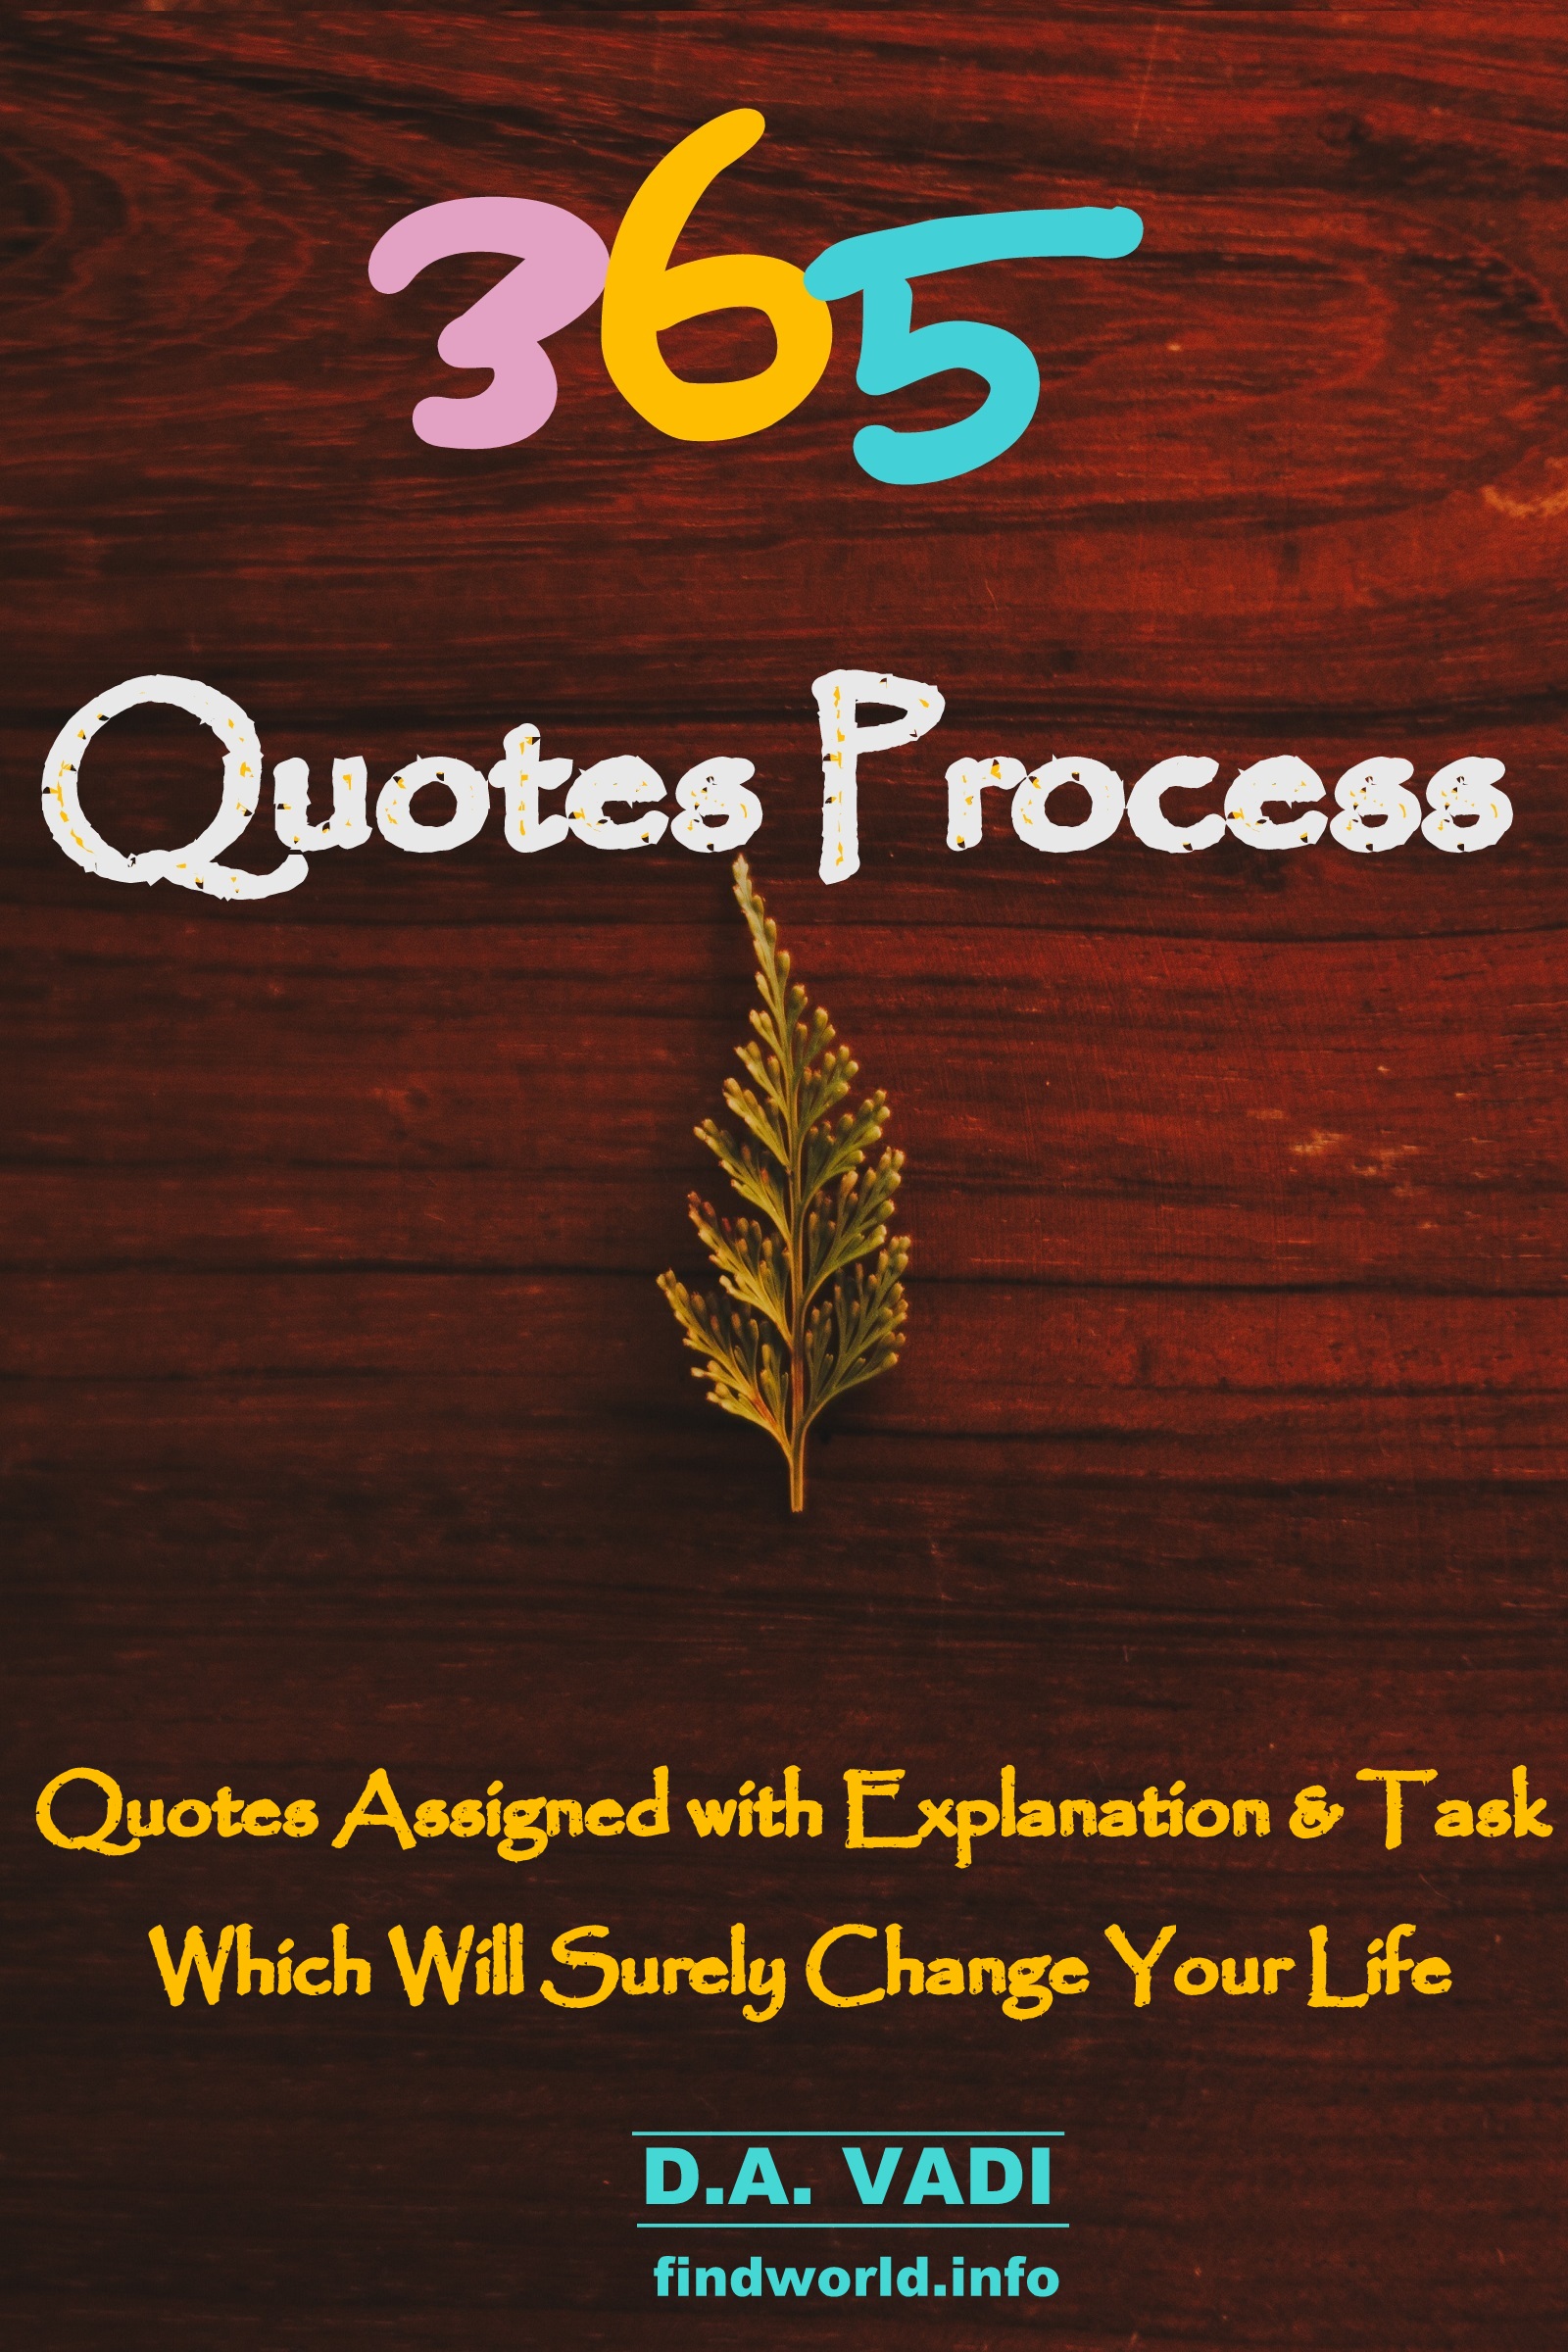 FREE: 365 QUOTES PROCESS by DHAVAL VADI